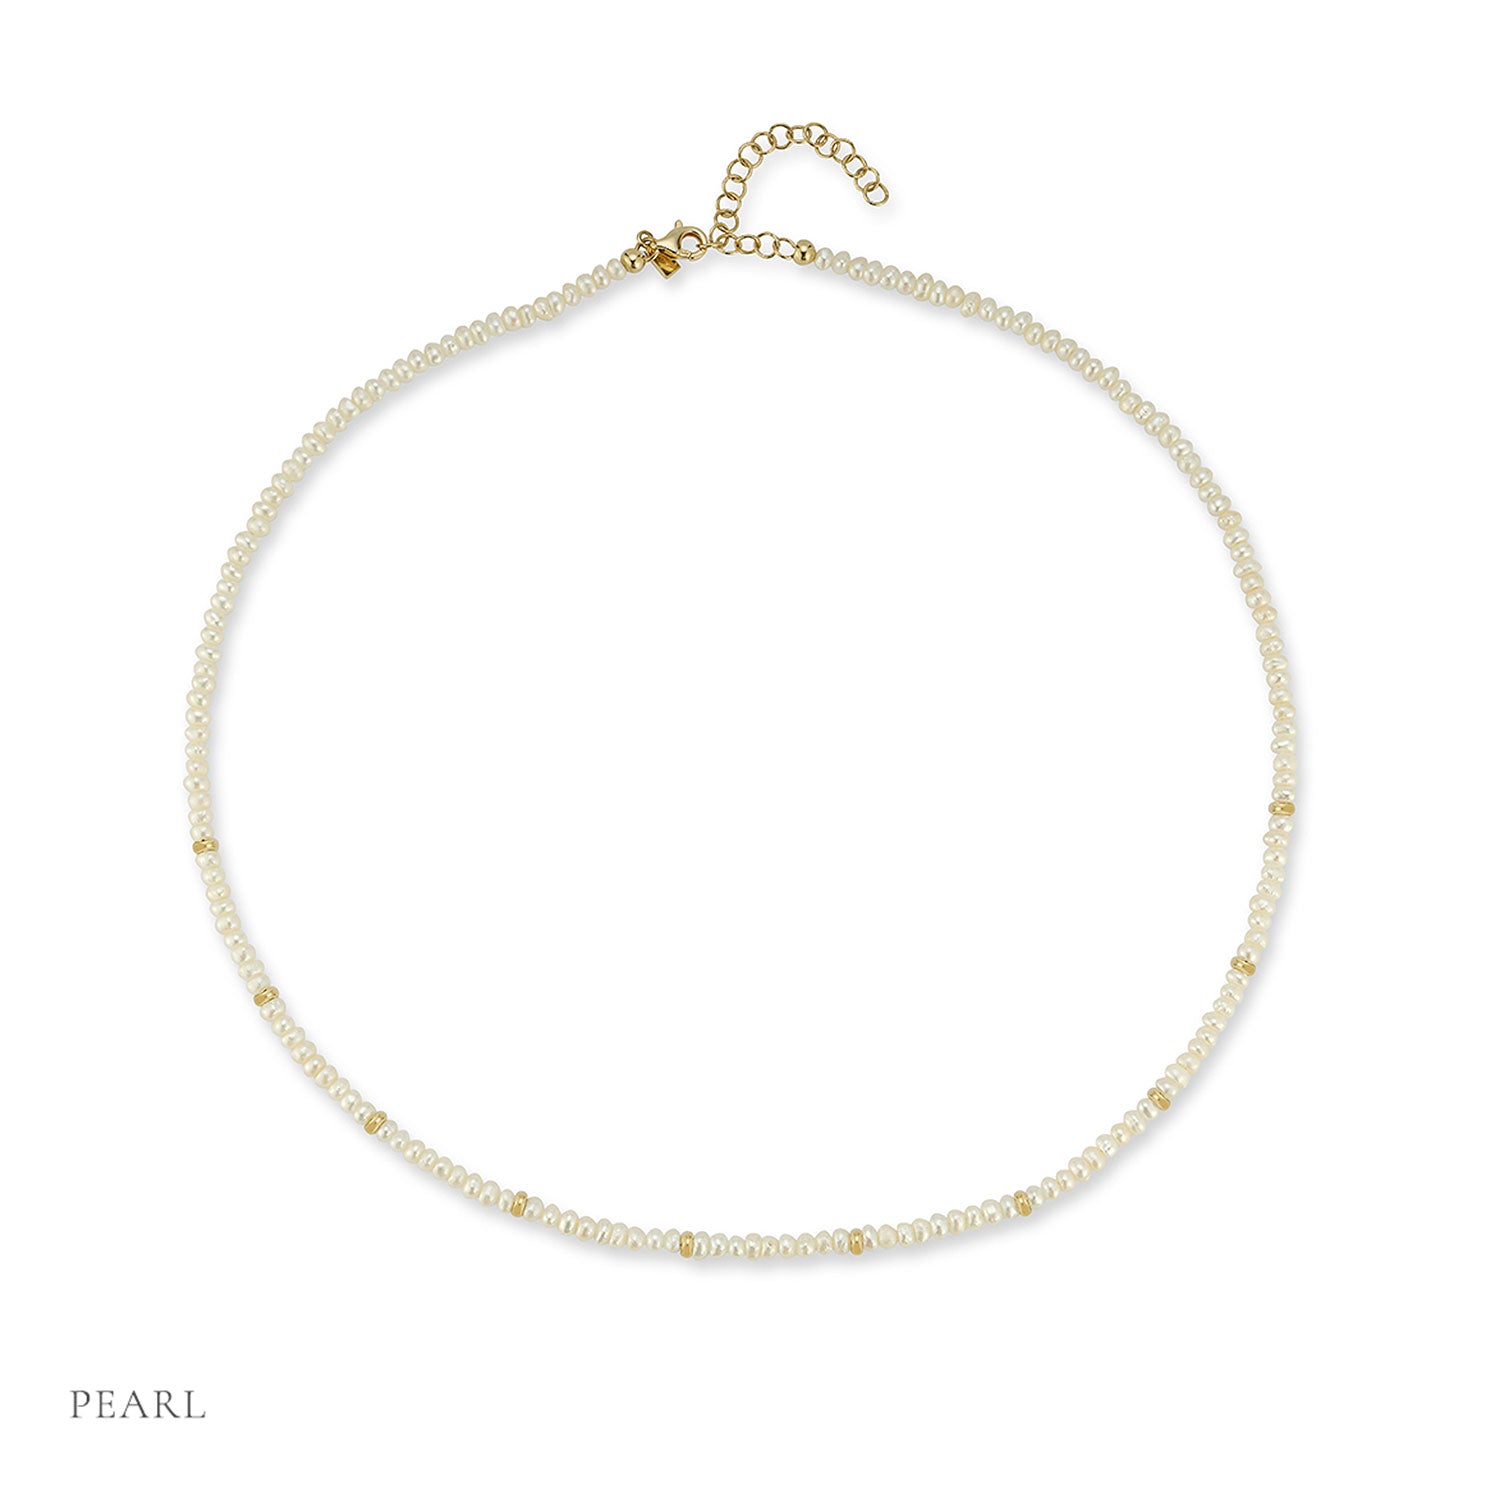 Birthstone Bead Necklace In Pearl with 14k yellow gold chain